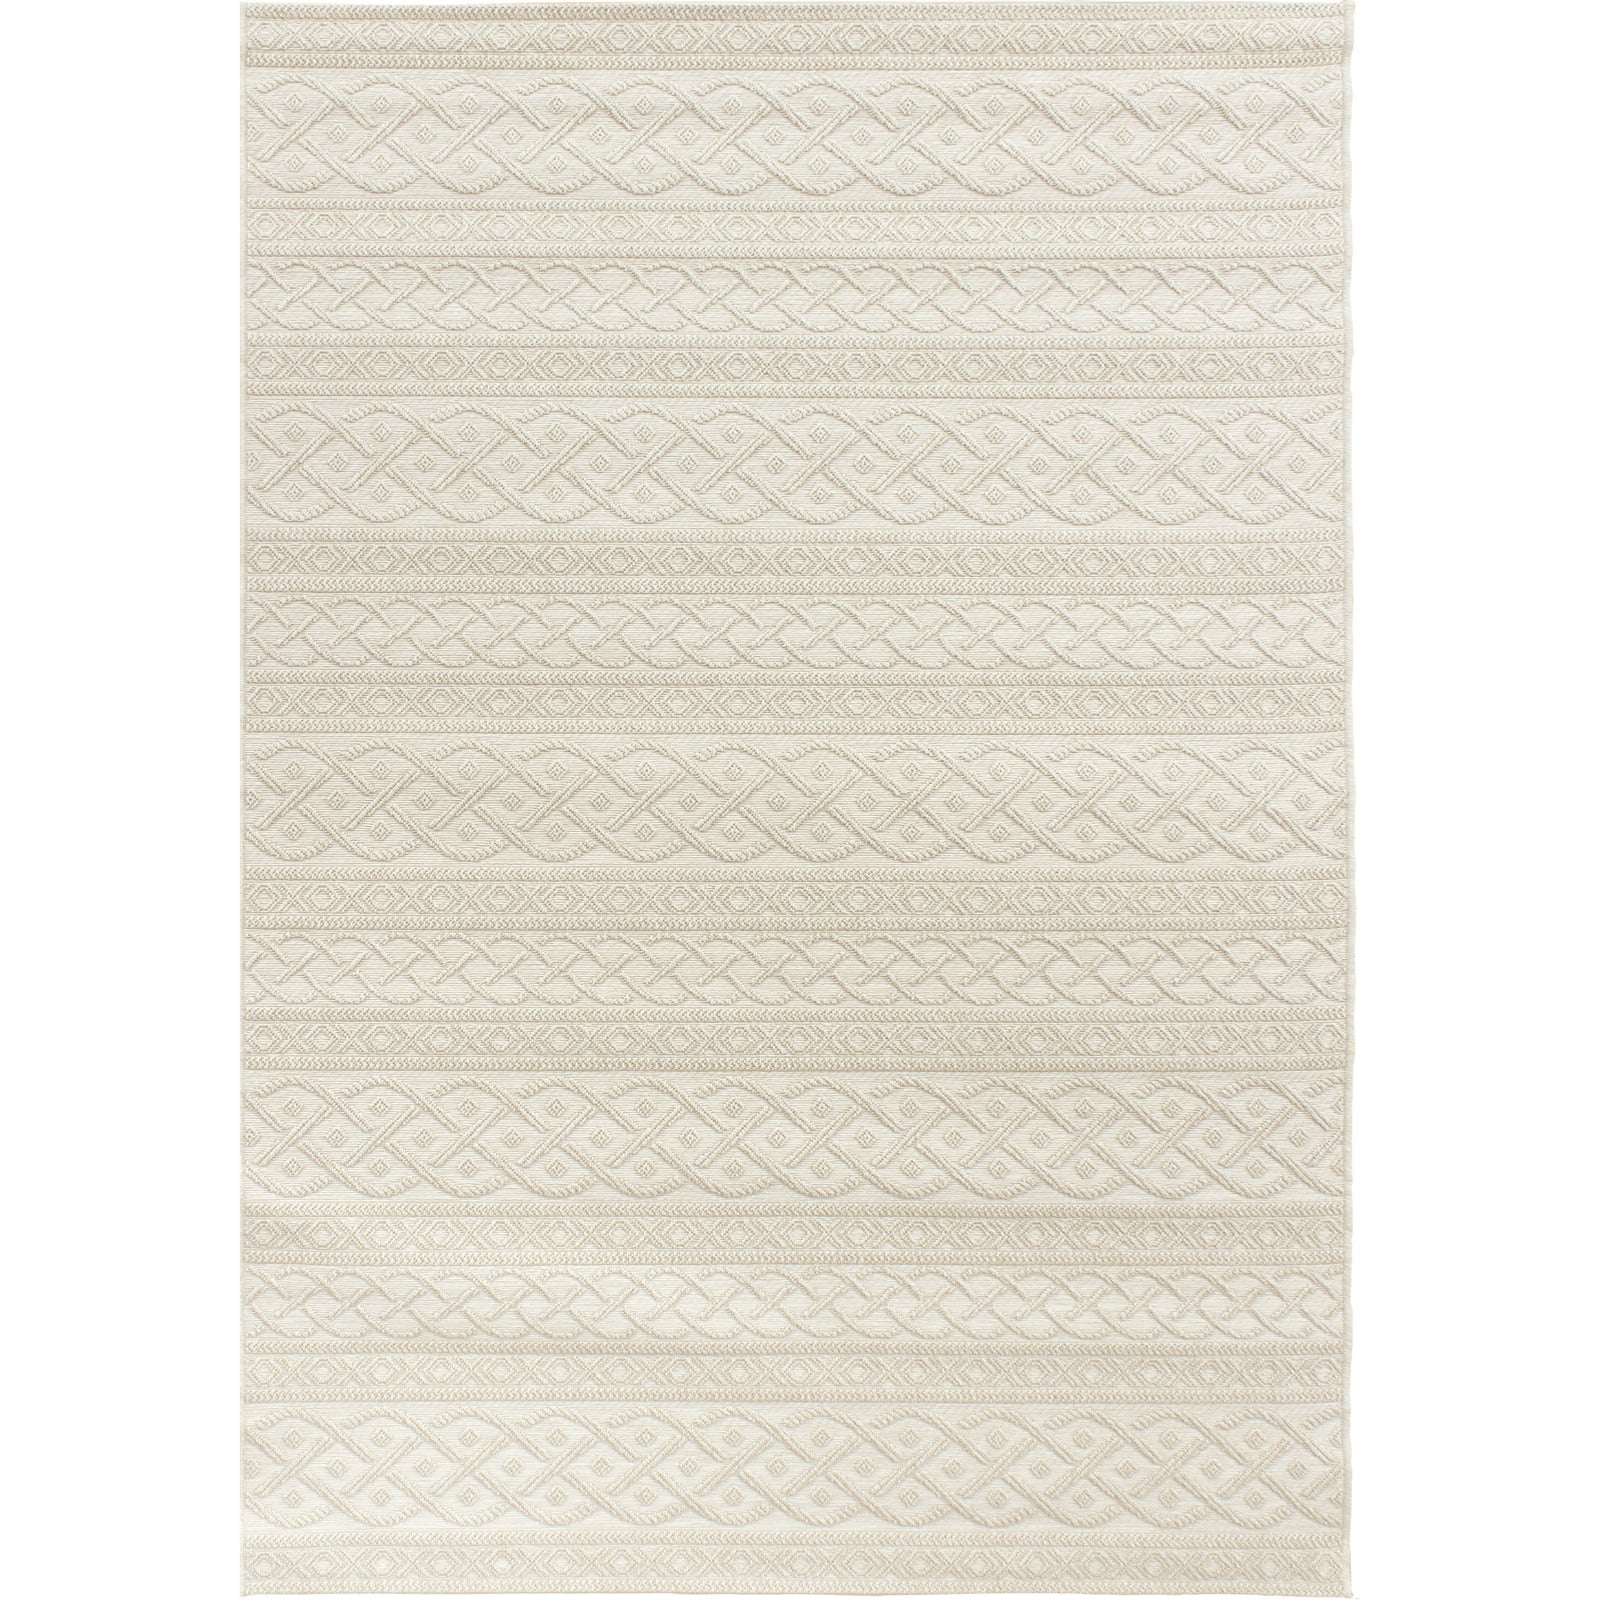 Orian Rugs Waterfront Tied Up Ivory Area Rug main image